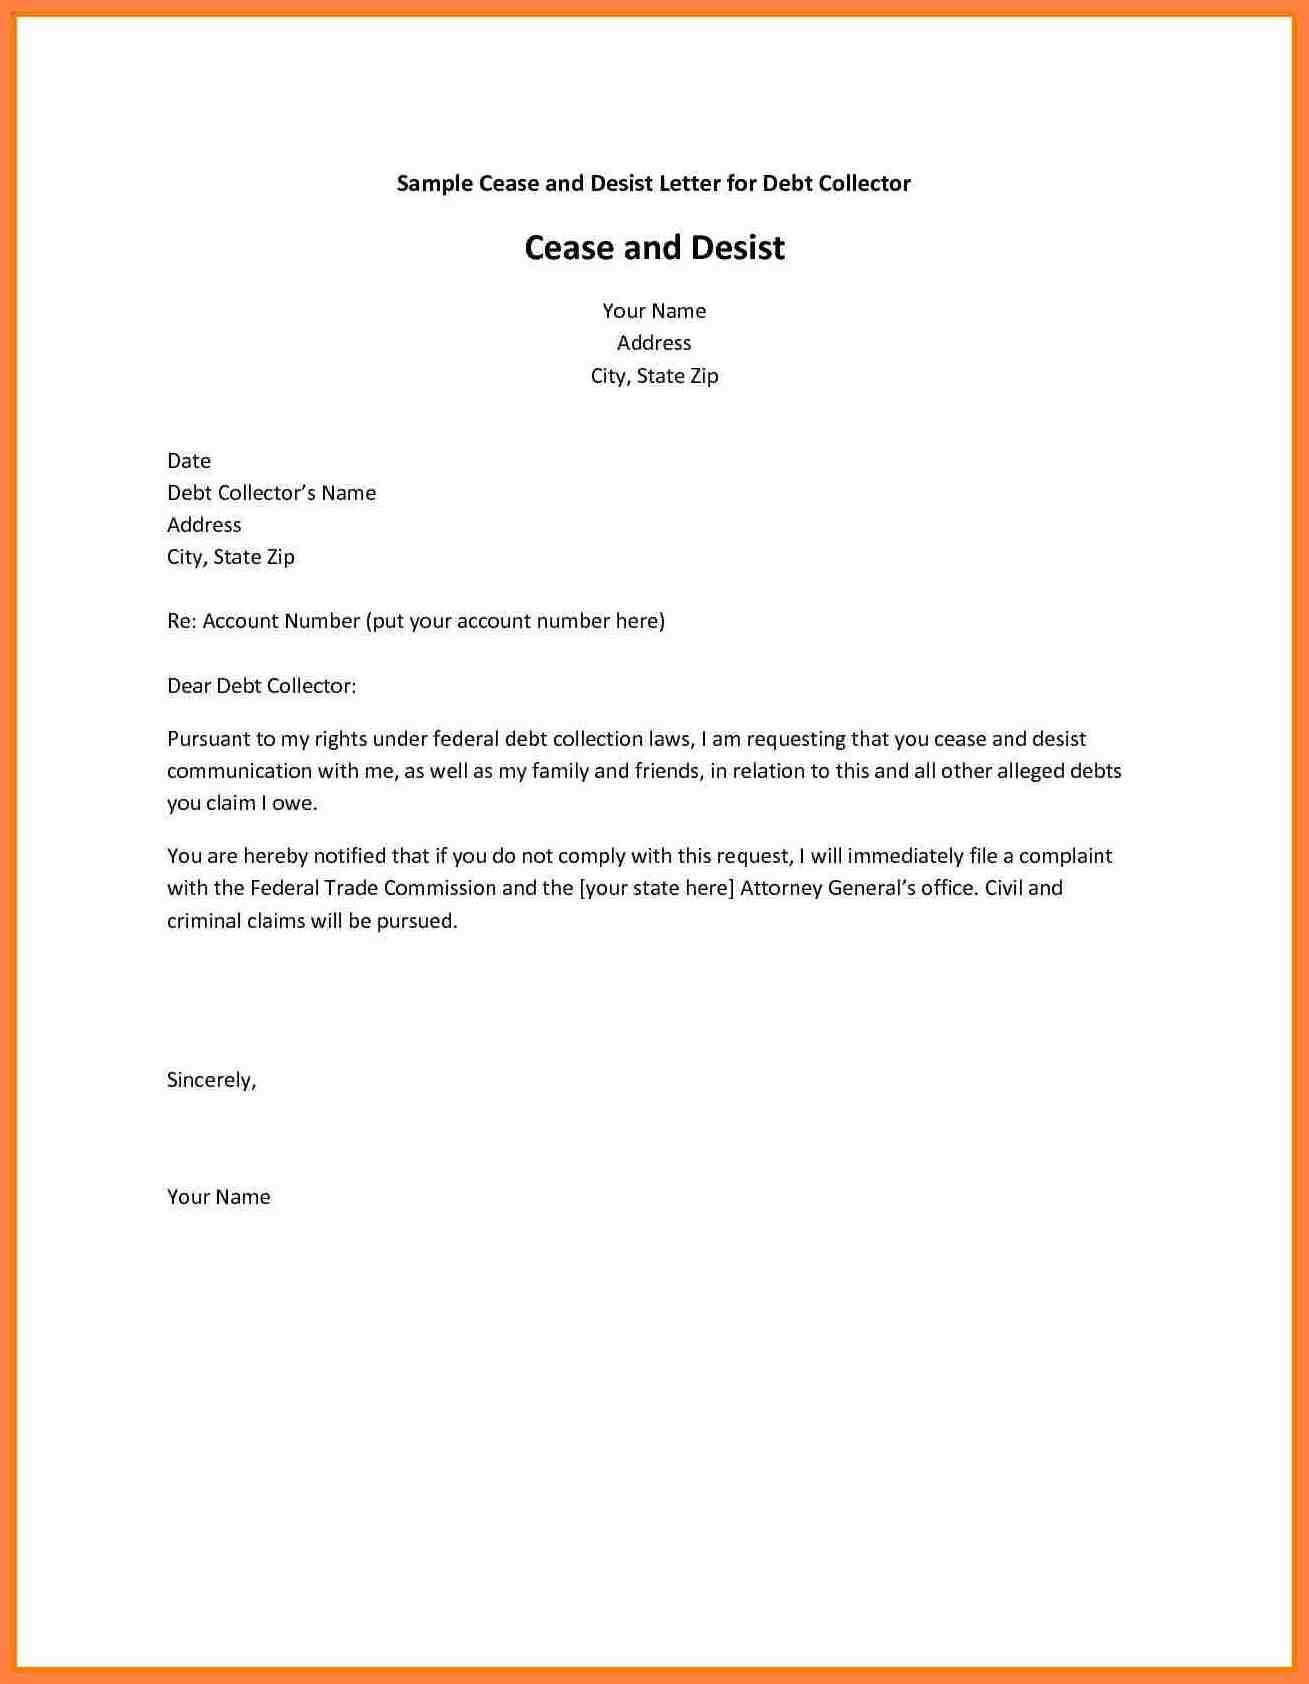 Cease and Desist Letter Template Amazon - Cease and Desist Letter Sample Lovely Best Debt Collection Cease and